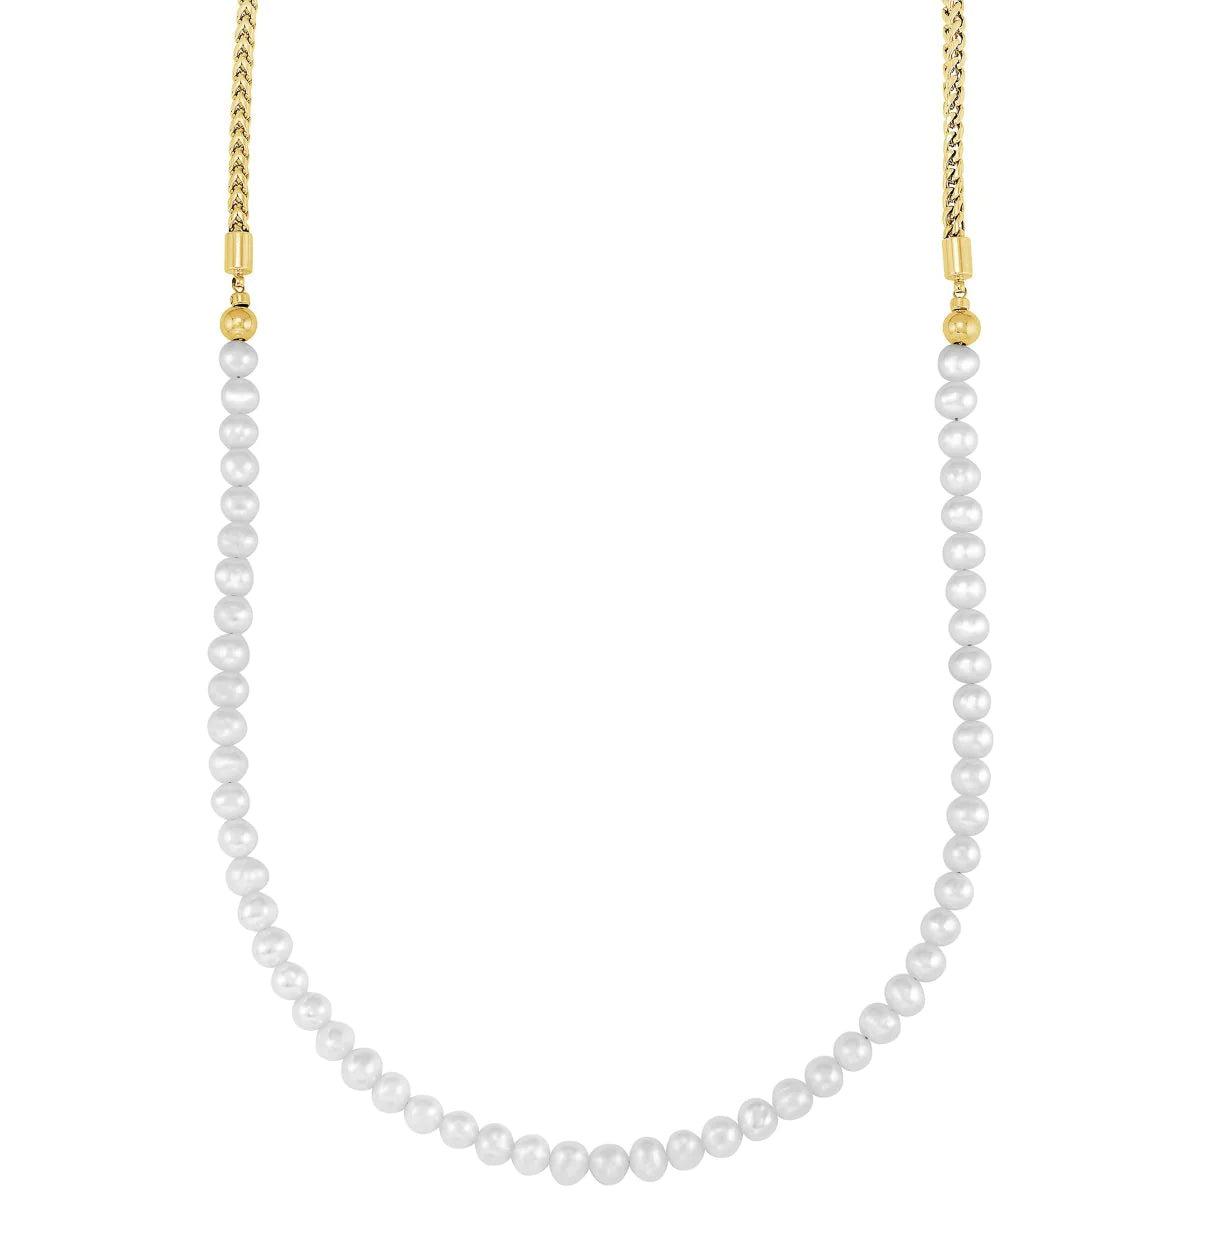 3.5MM FRANCO & PEARLS NECKLACE